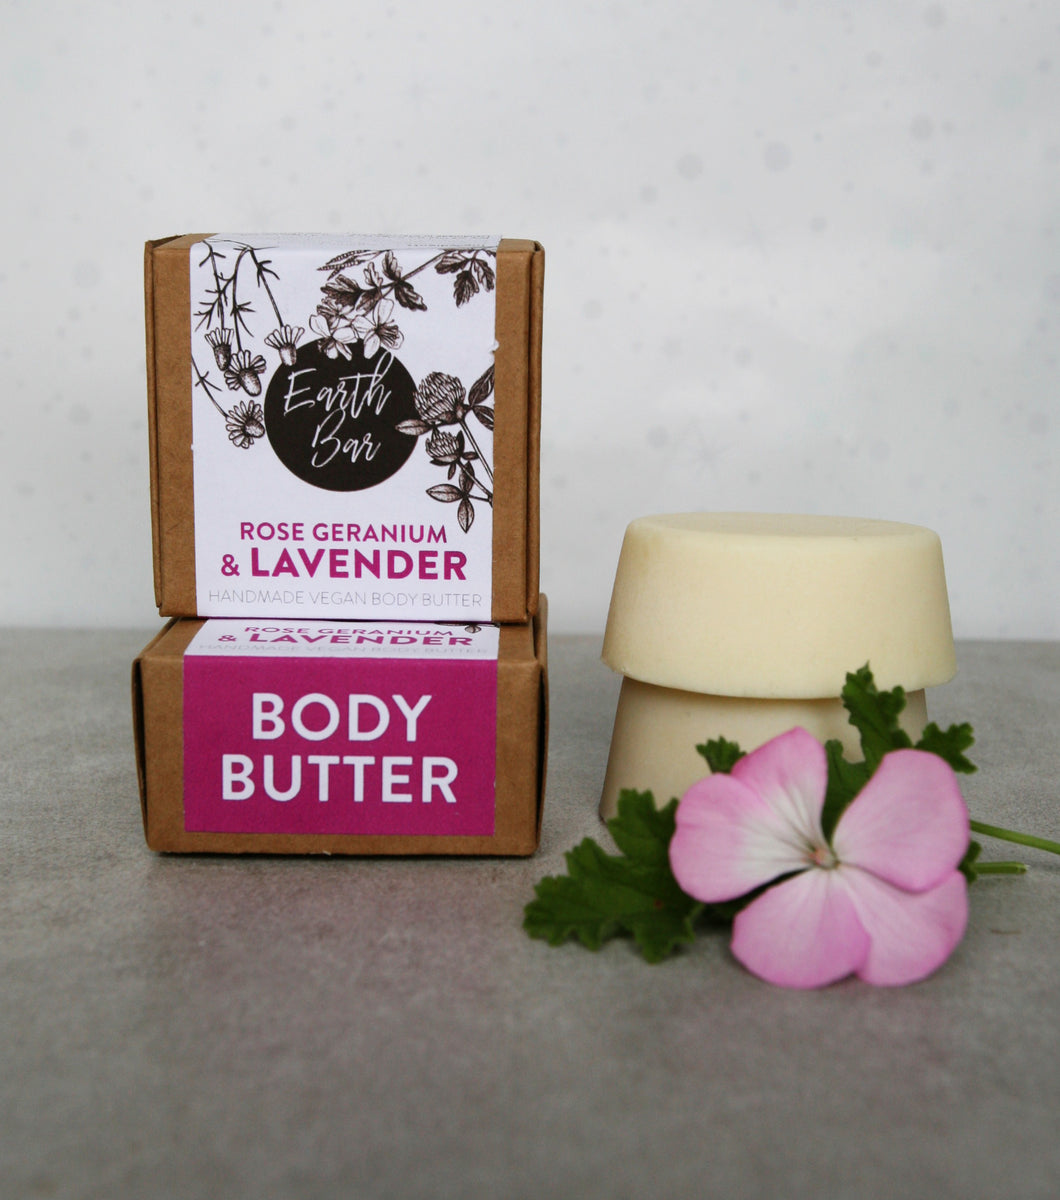 Rose Geranium and Lavender Body Butter